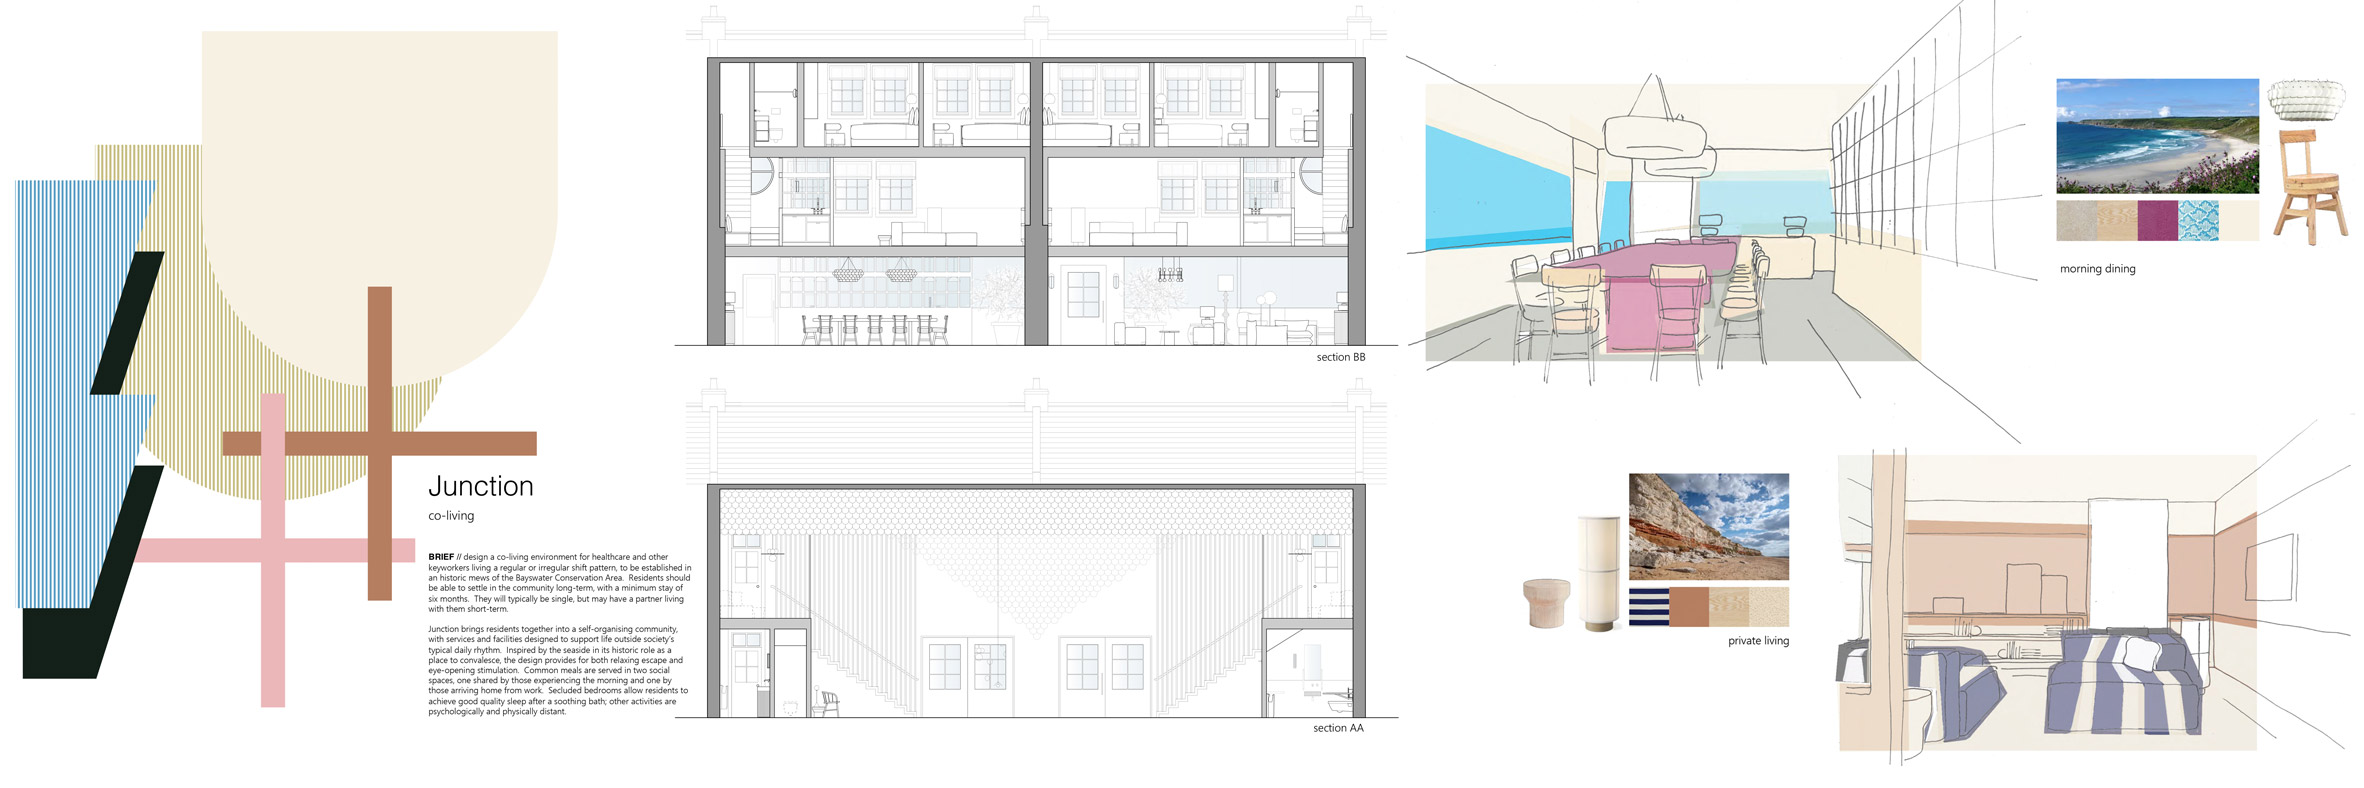 Moodboard, interior render and section drawings of Junction - Co-living for healthcare employees by Fran Middleton